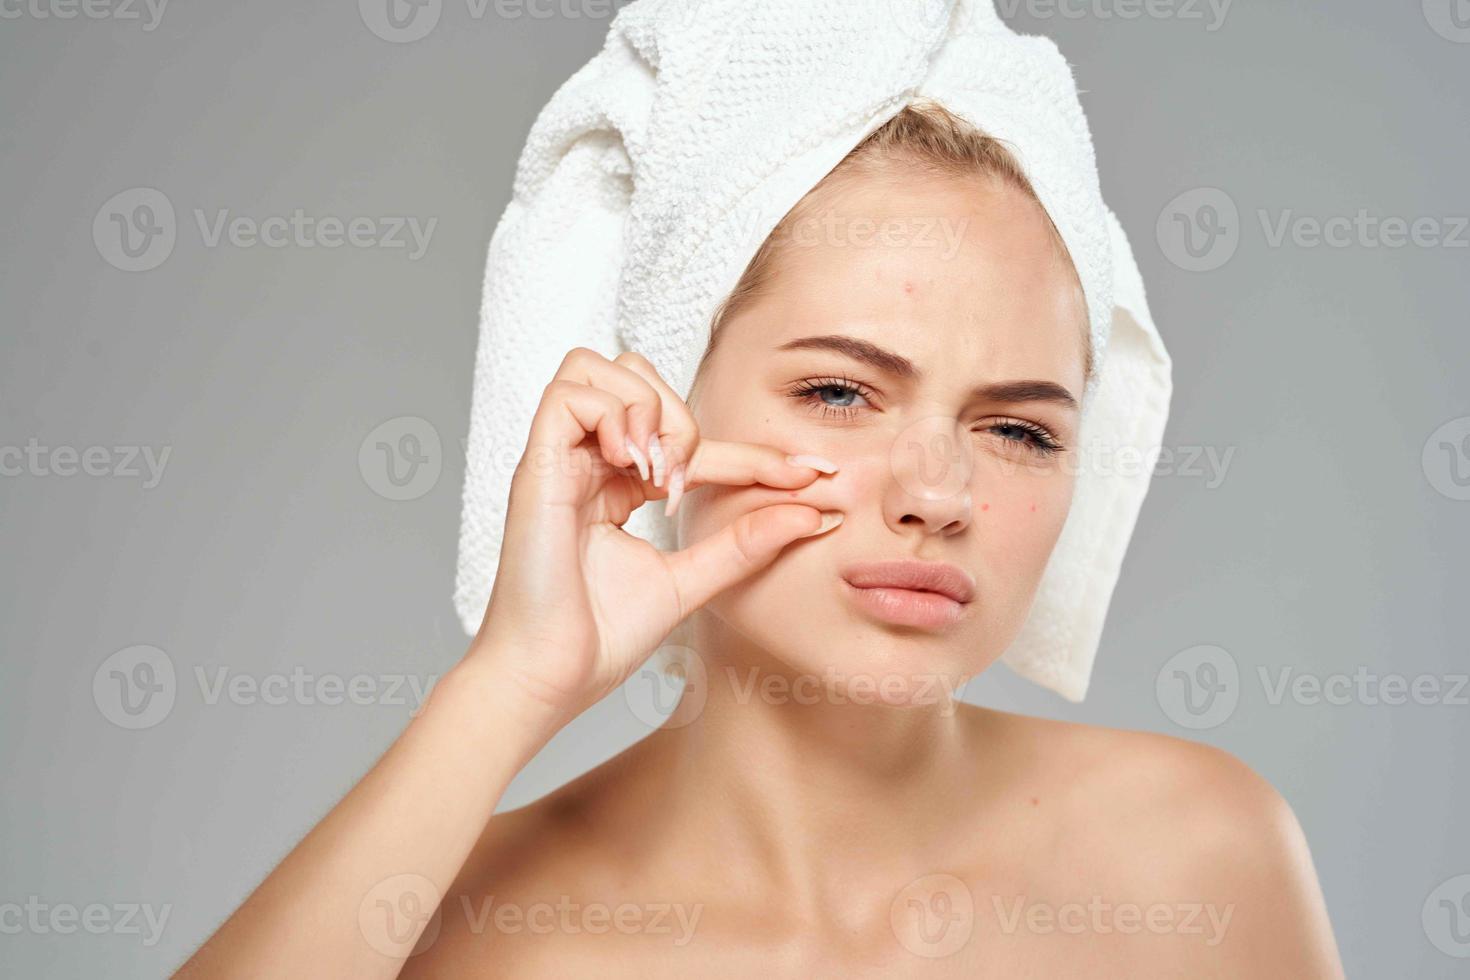 woman with bare shoulders and a towel on her head pimples on her face close-up photo